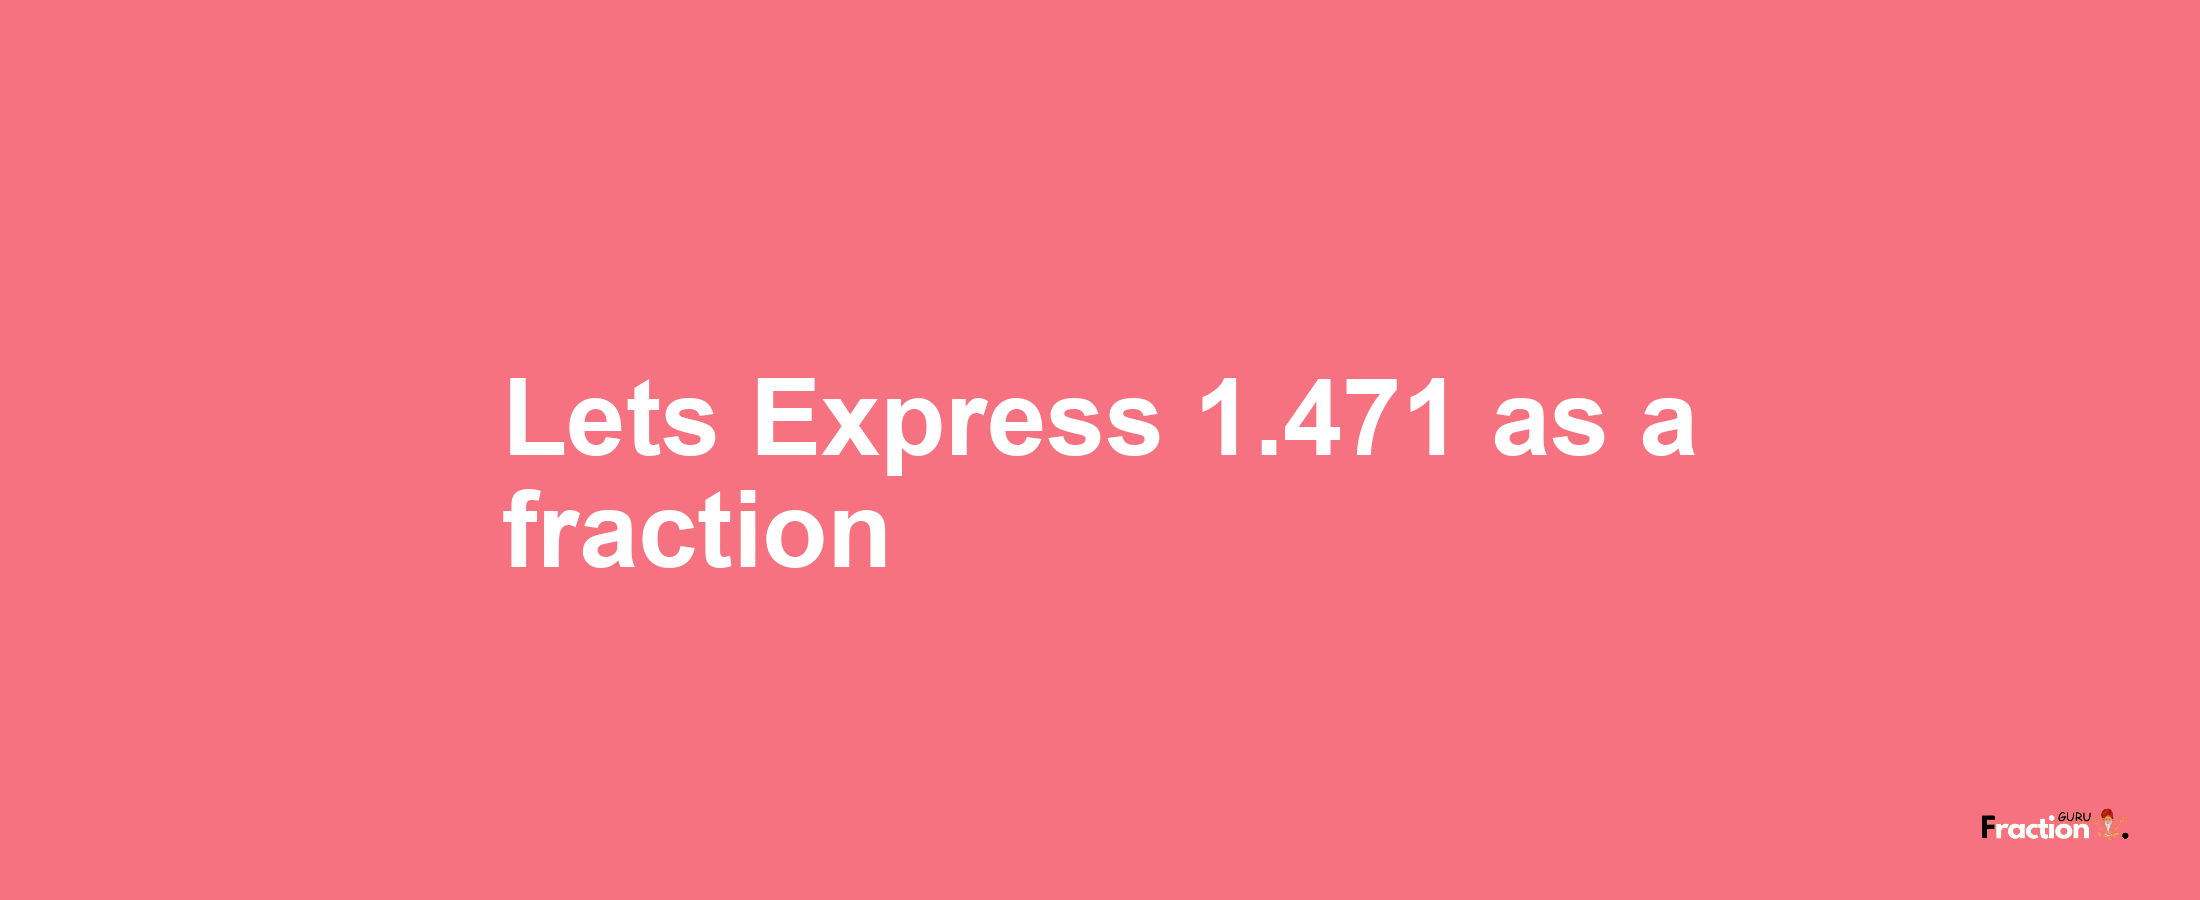 Lets Express 1.471 as afraction